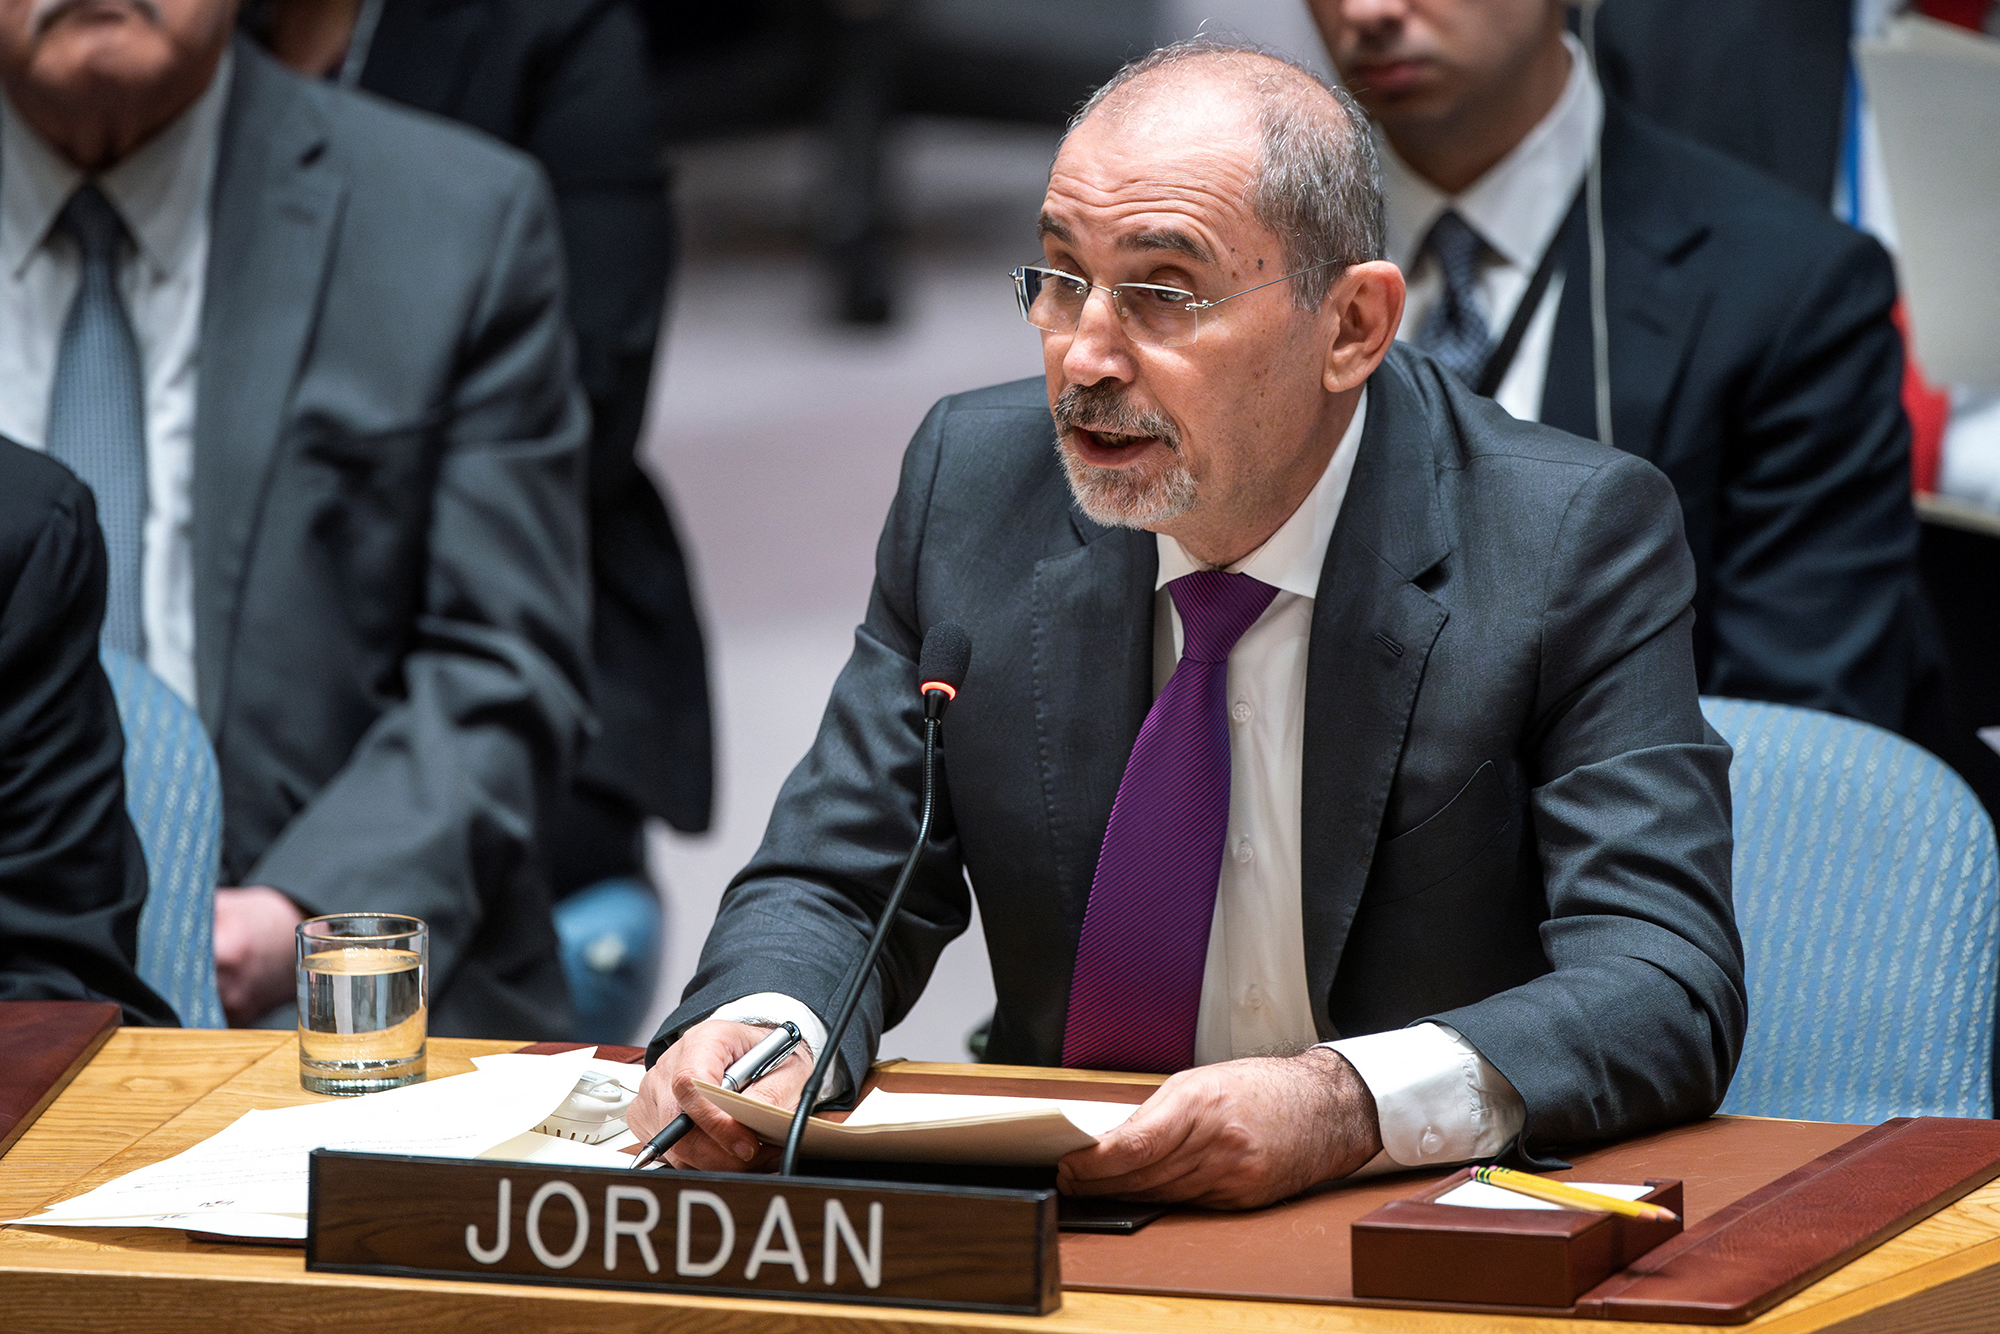 Jordan's Deputy Prime Minister and Minister for Foreign Affairs and Expatriates Ayman Safadi speaks to members of Security Council at U.N. headquarters in New York City, on April 18.